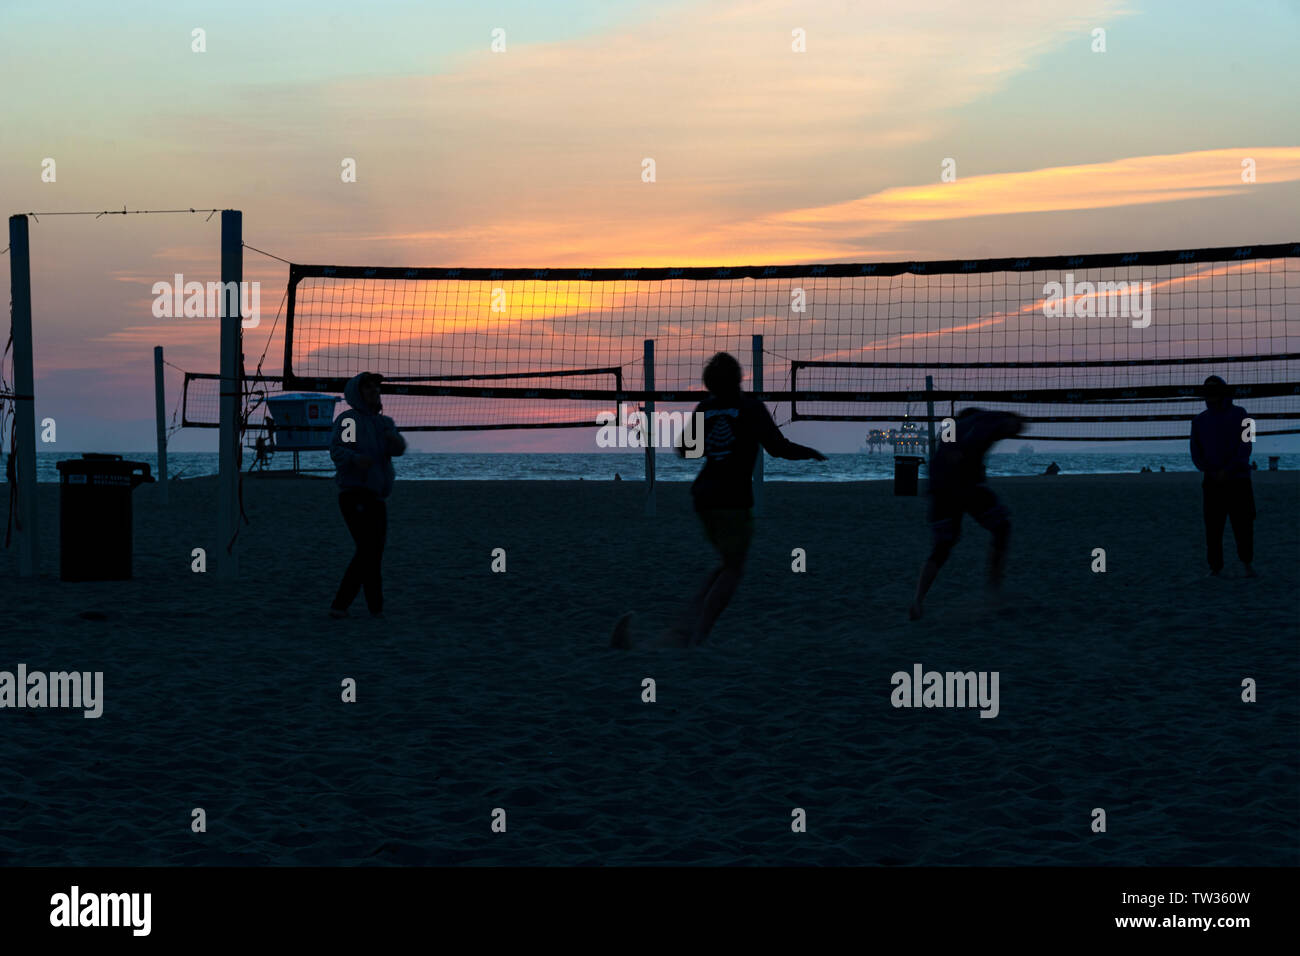 Huntington Beach, CA / March 25, 2019: Silhouettes of volleyball players on the beach at sunset in Huntington Beach, California. Stock Photo